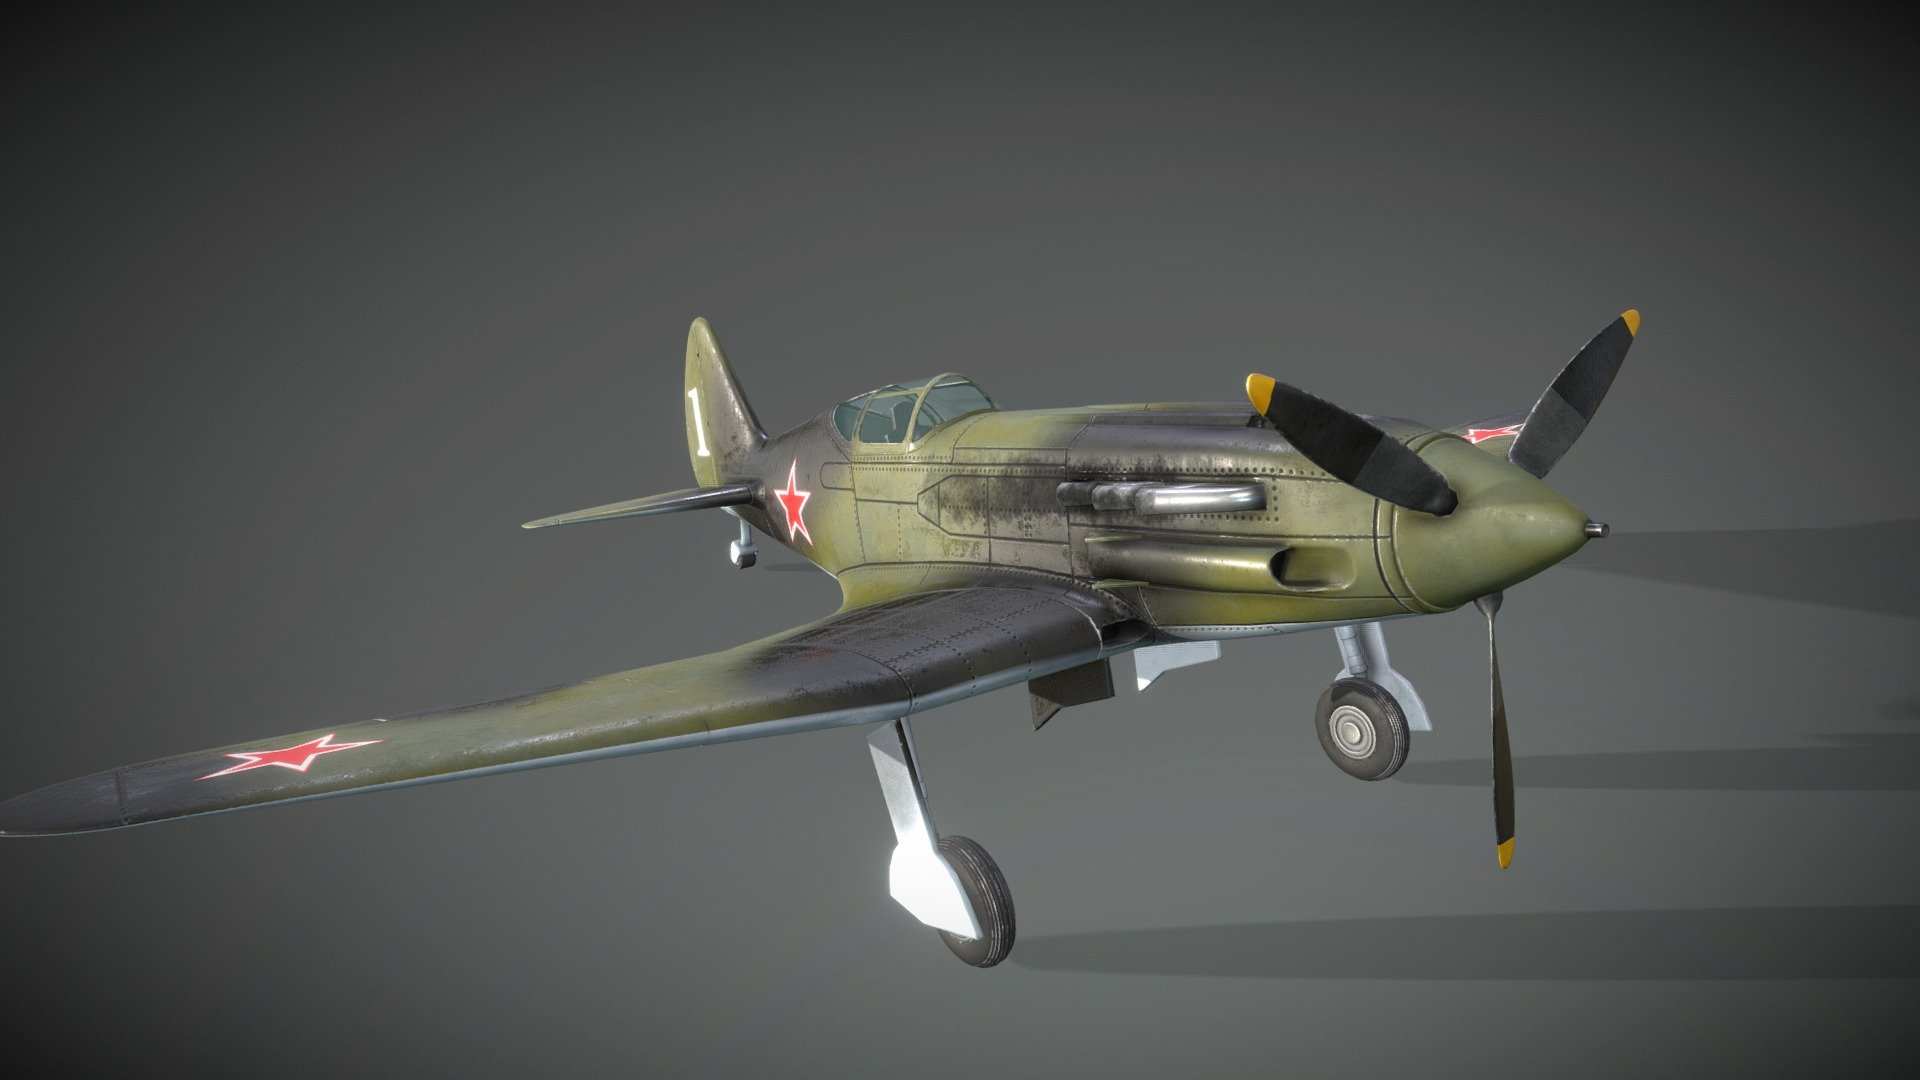 Escape Germany - Mikojan-Gurewitsch MiG-3

Fully destroyable 3D Model for Escape Germany (PC-Game)

Fully rigged an animated ingame. Flight Example BF109: https://www.youtube.com/watch?v=jb6zUBnfUZE&amp;t=8s

Model + Textures by: David Falke

Rigged + Animations by: Spaehling

Website: https://www.grip420.com/

Discord: Follow us on Discord

Facebook Follow us on Facebook

Game  Escape Germany - Escape Germany - MiG-3 - 3D model by GRIP420 3d model